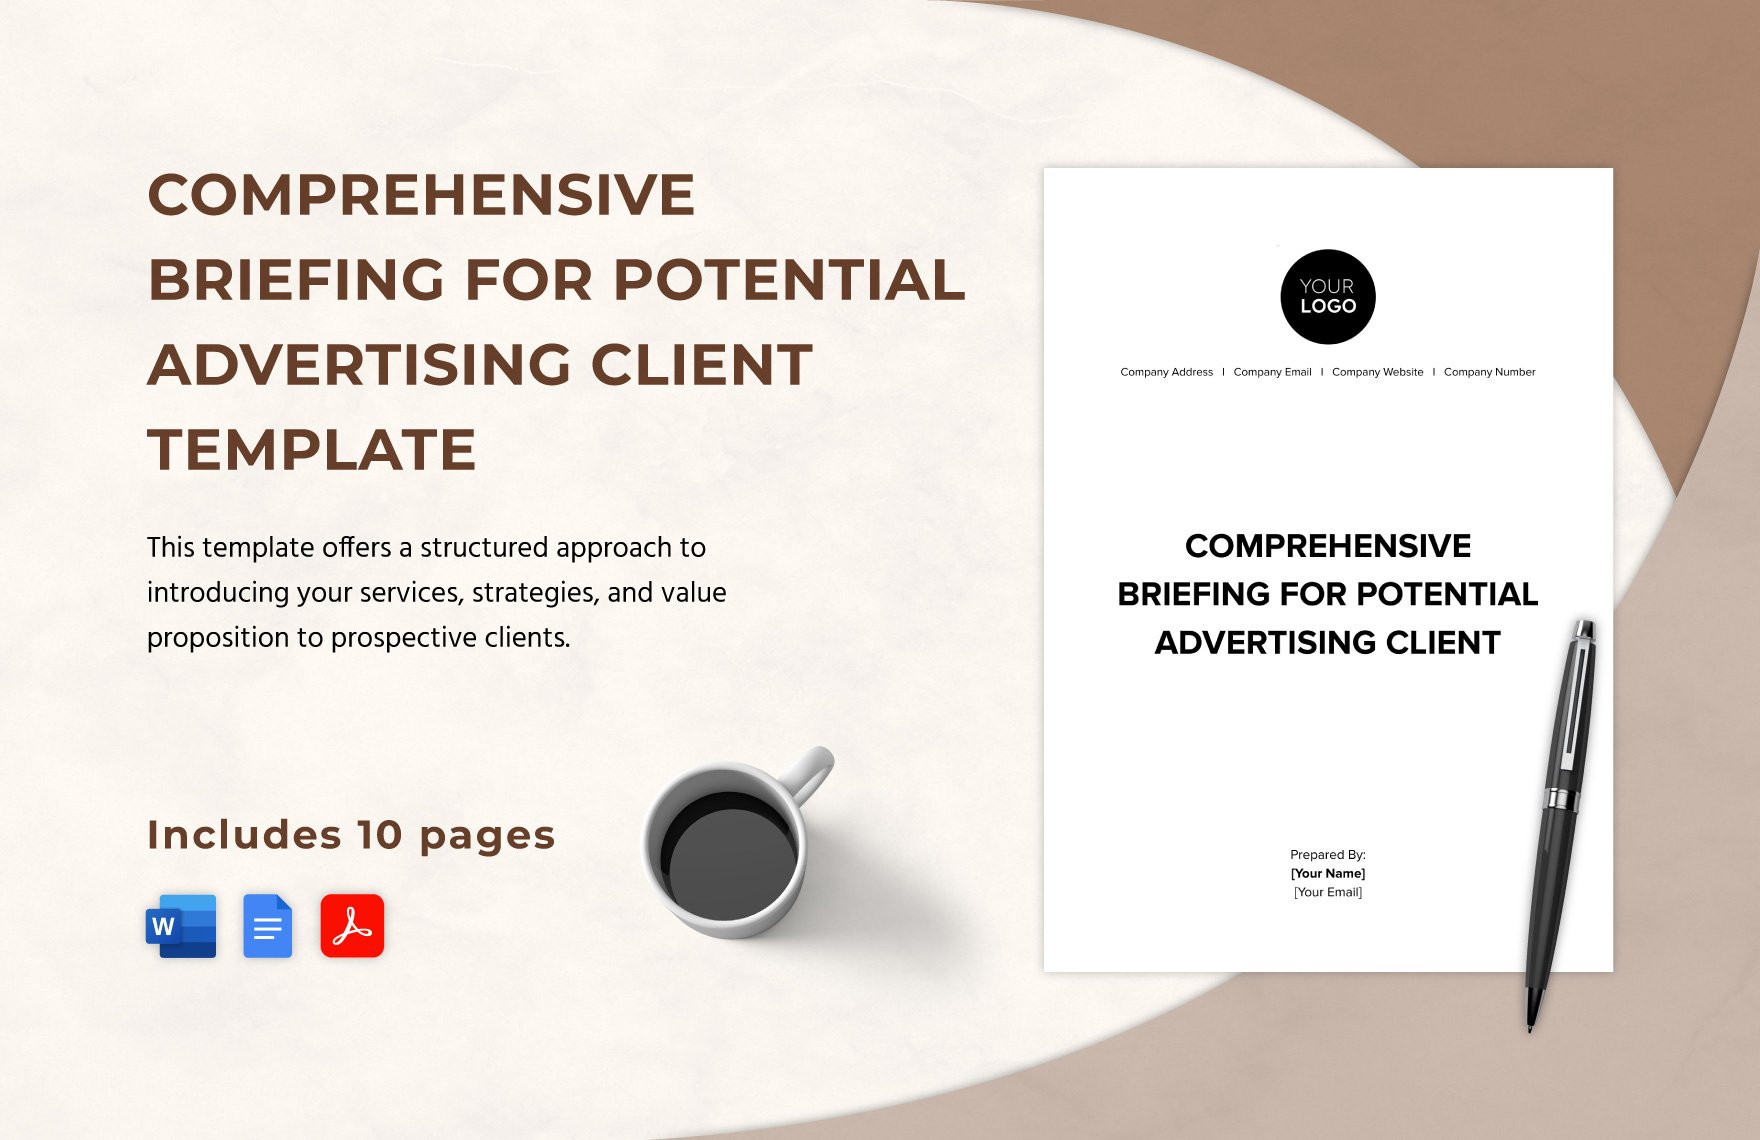 Comprehensive Briefing for Potential Advertising Client Template